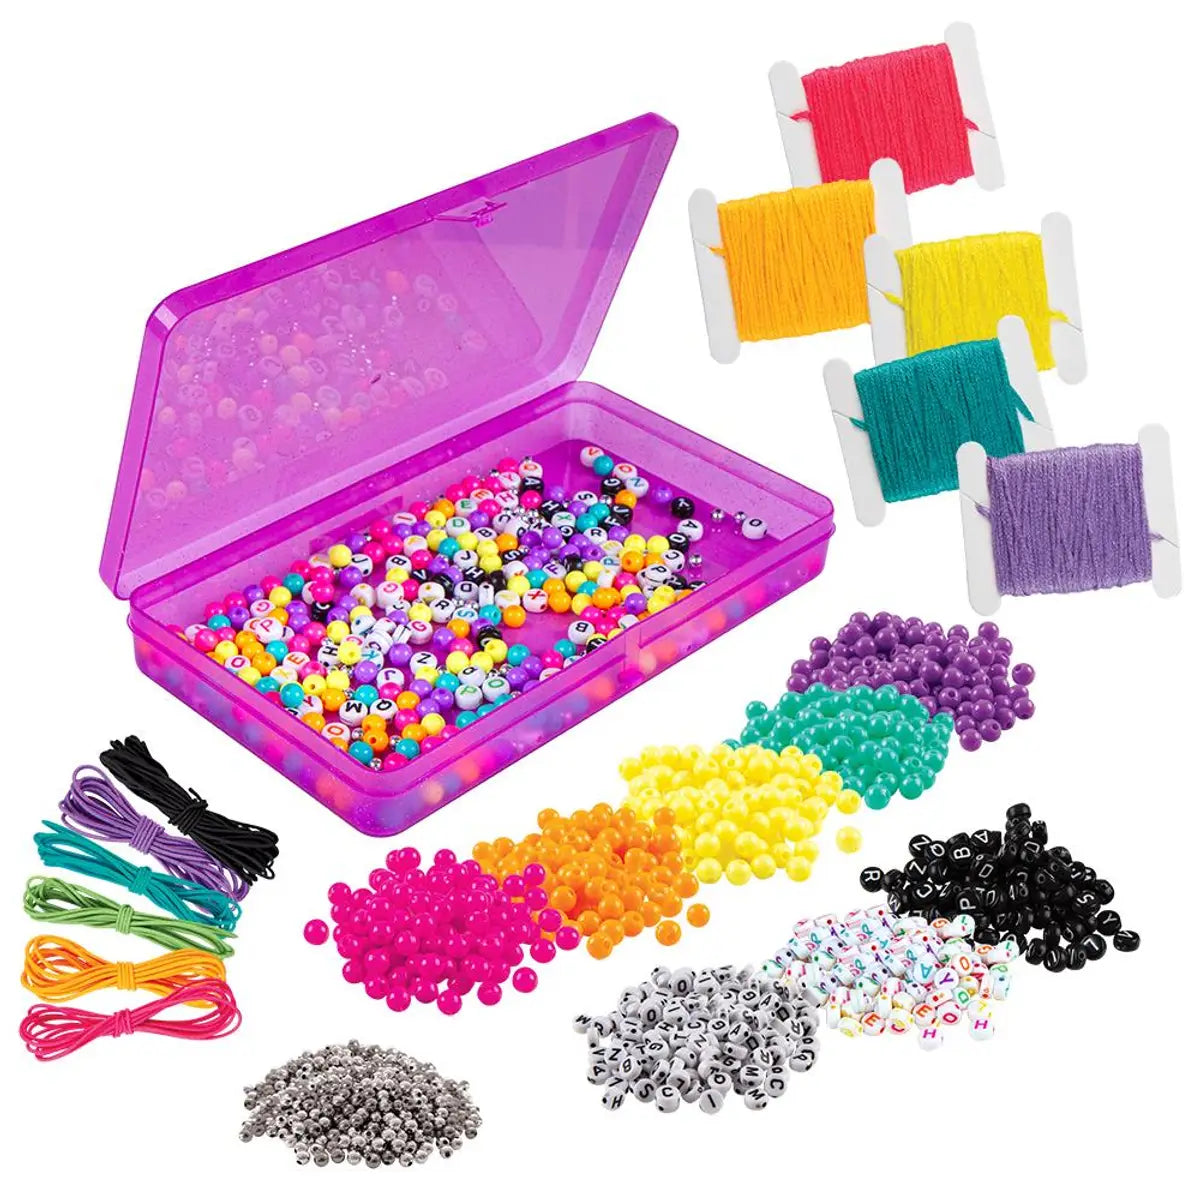 Tell Your Story Pastel Rainbow Beads 500+ – Treehouse Toys